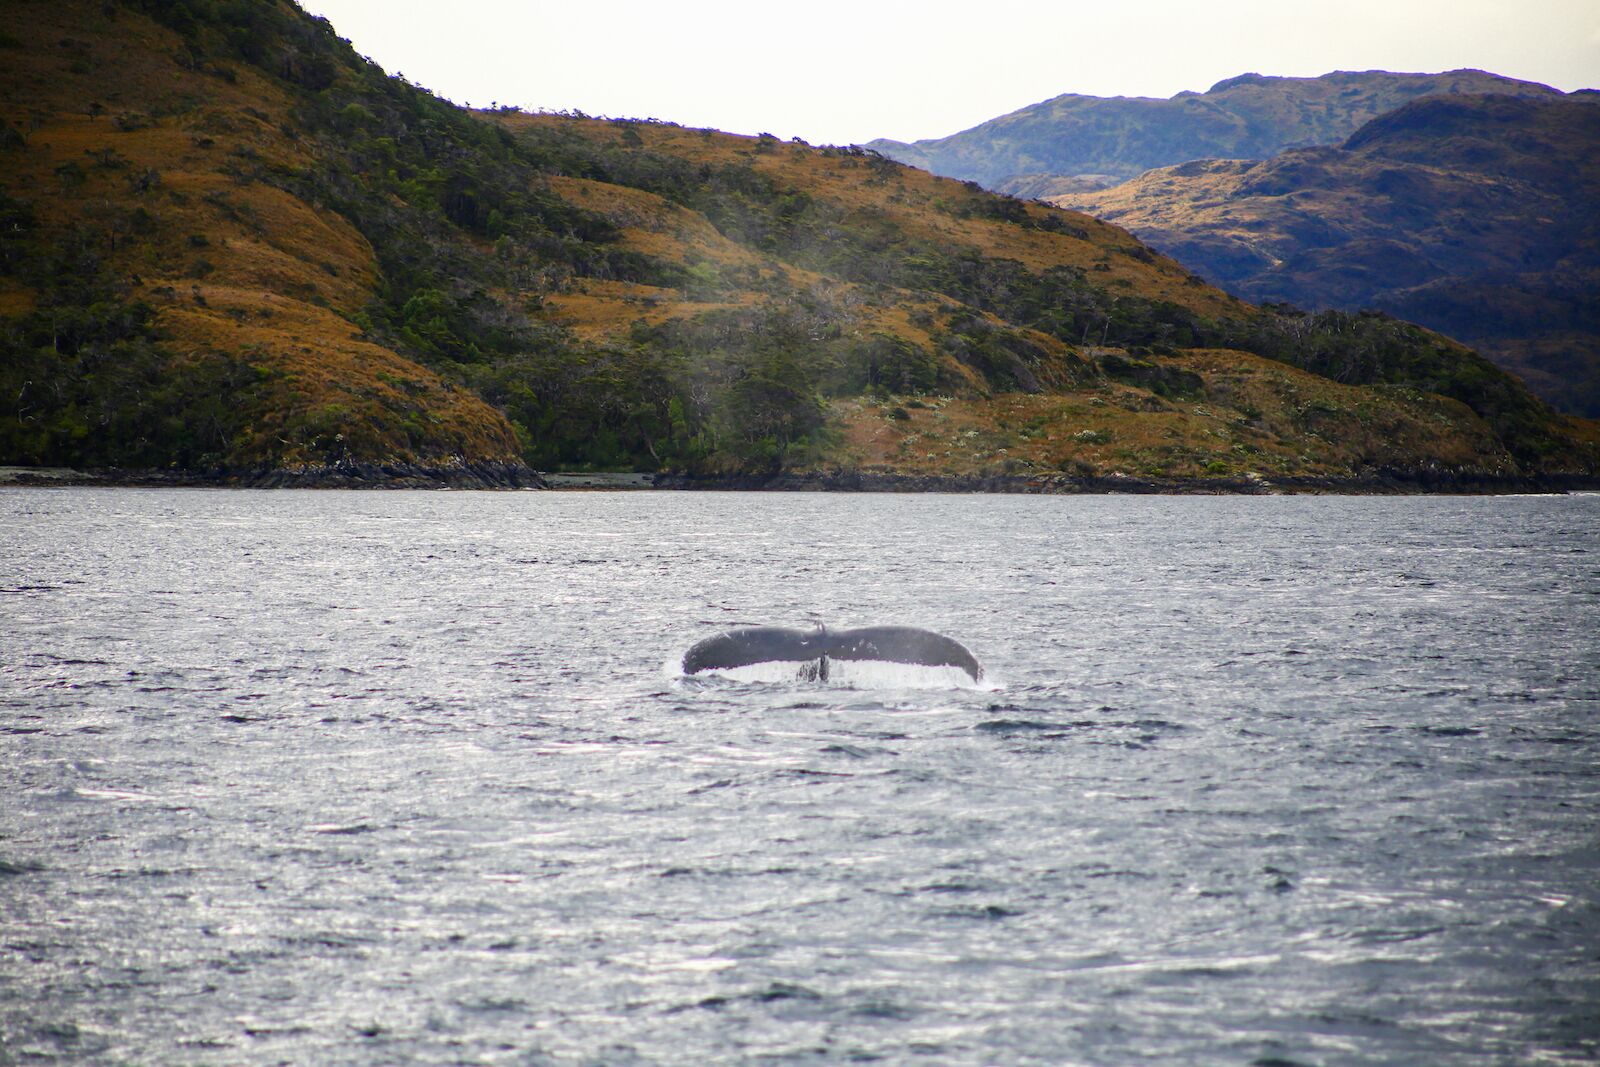 A whale tail spotted from the boat of a wildlife tourism experience in Chile